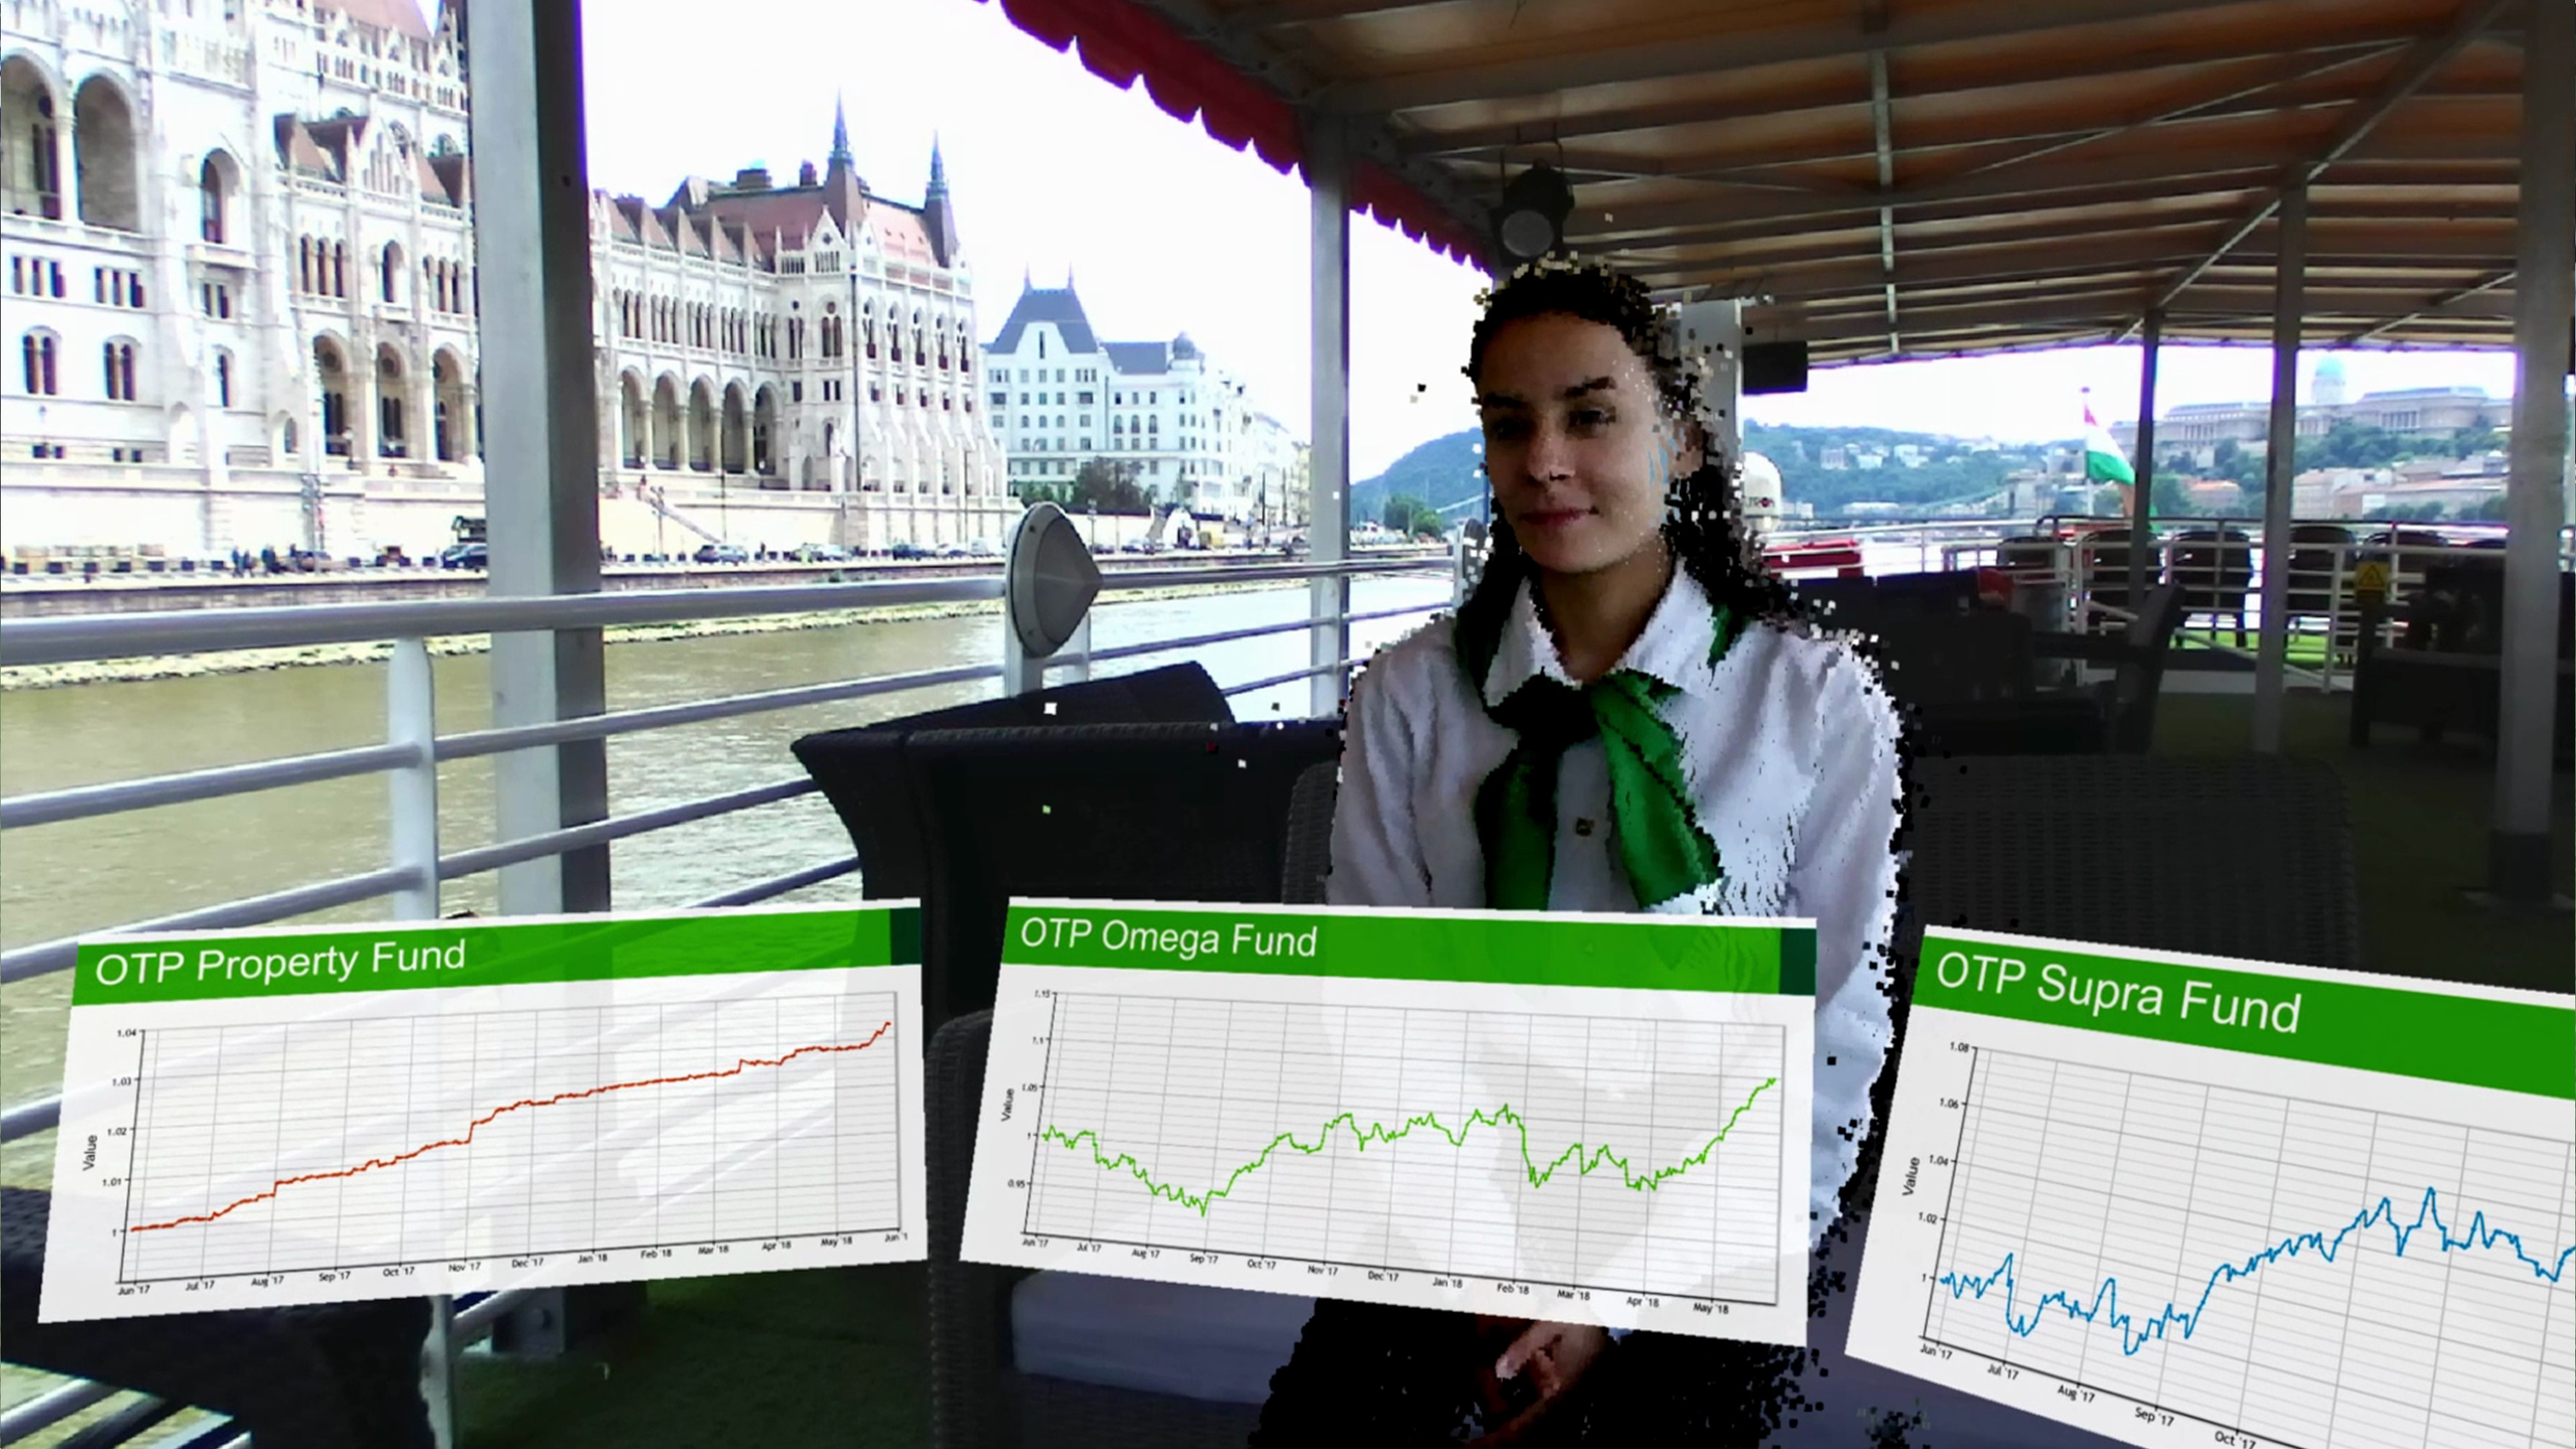 Bank assistant as a hologram in front of the client presenting charts